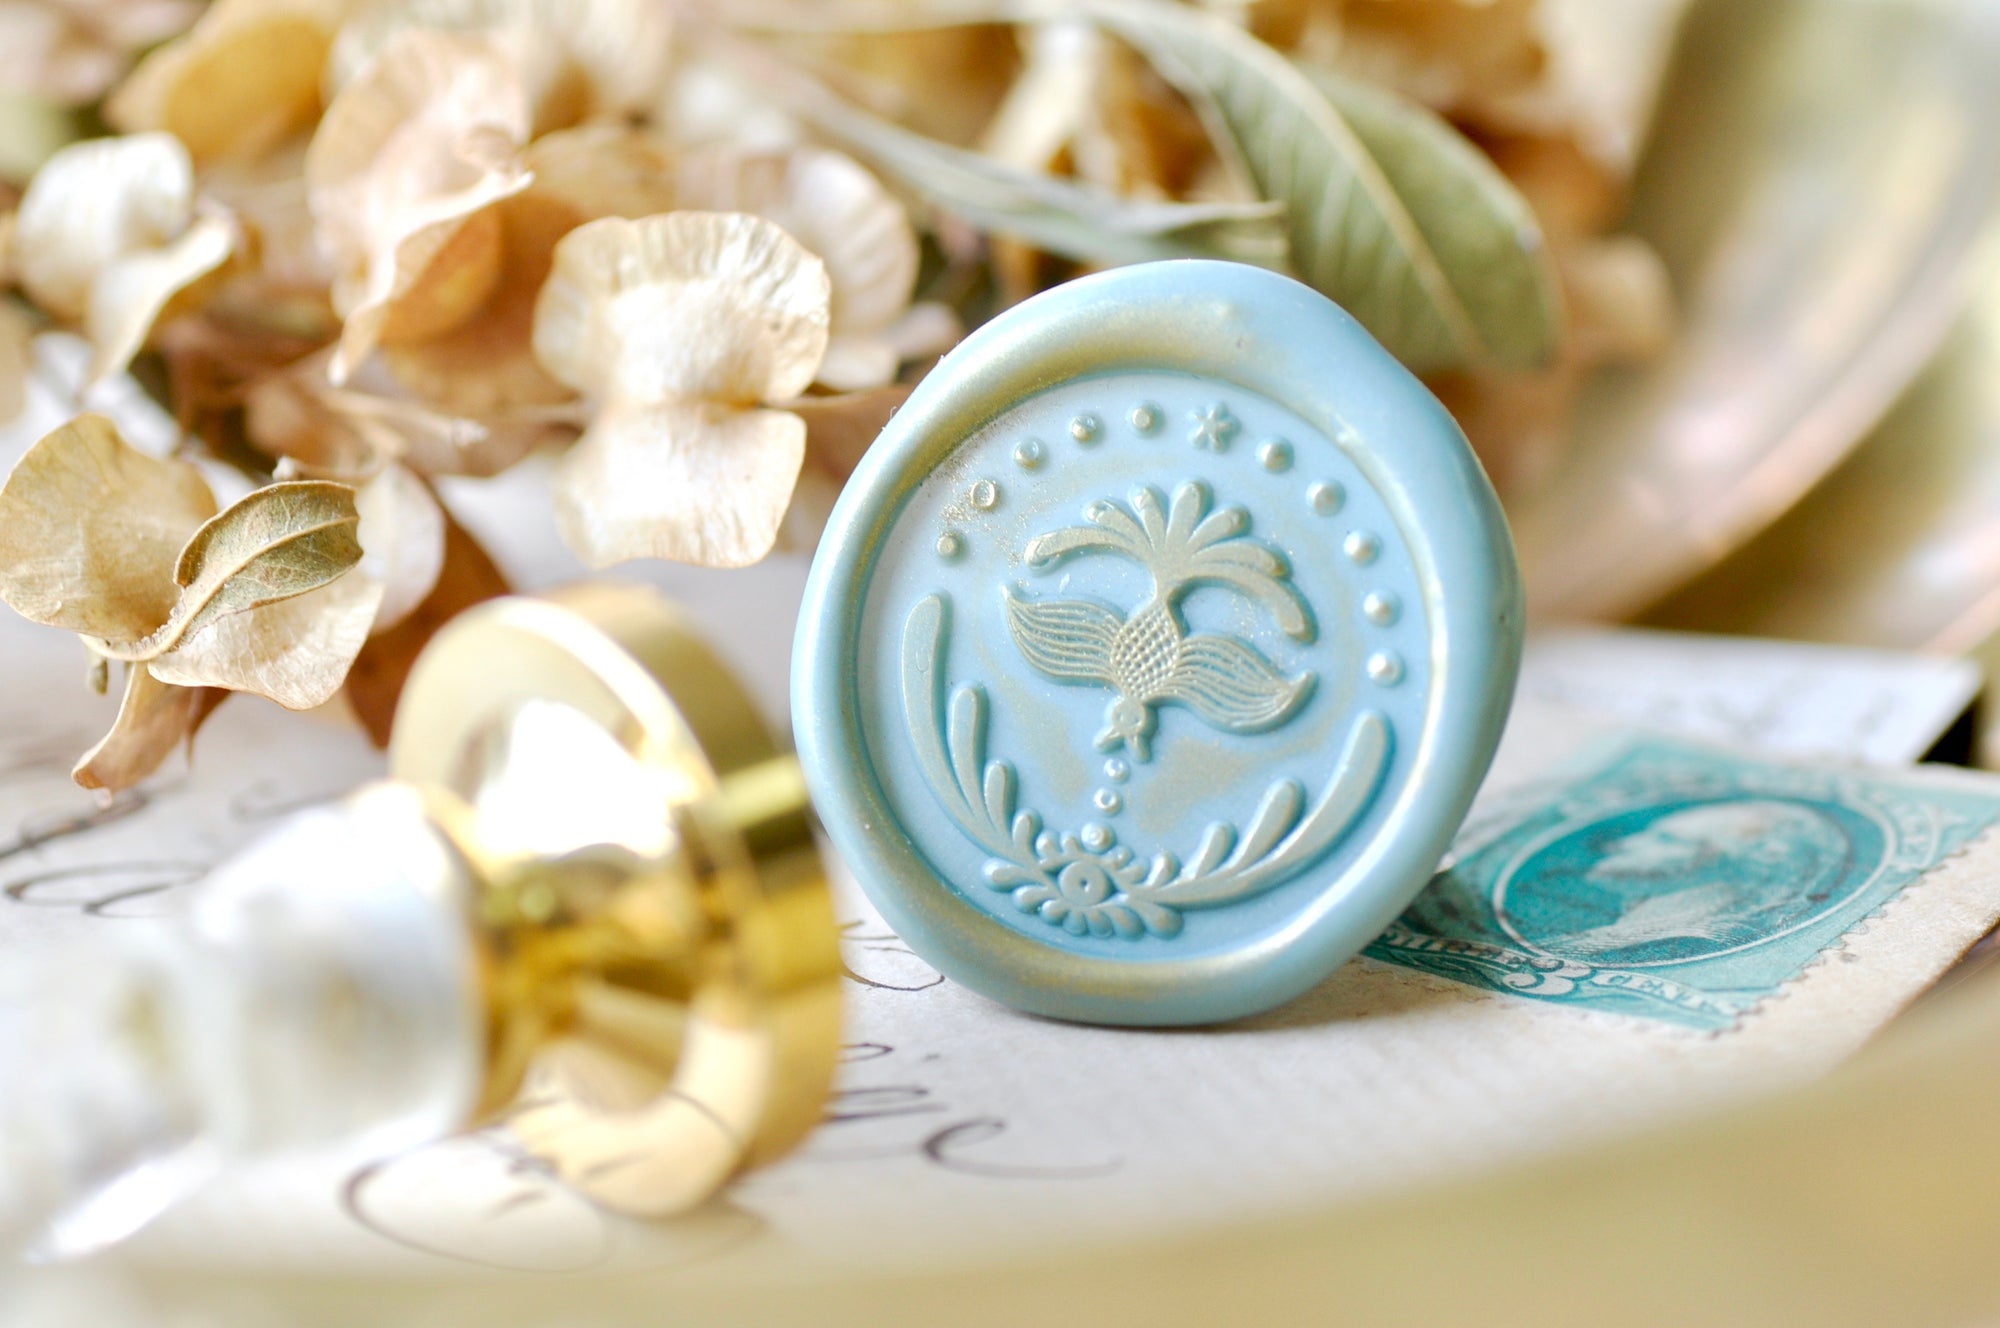 Mystic Vision Wax Seal Stamp Designed by Orla Bird